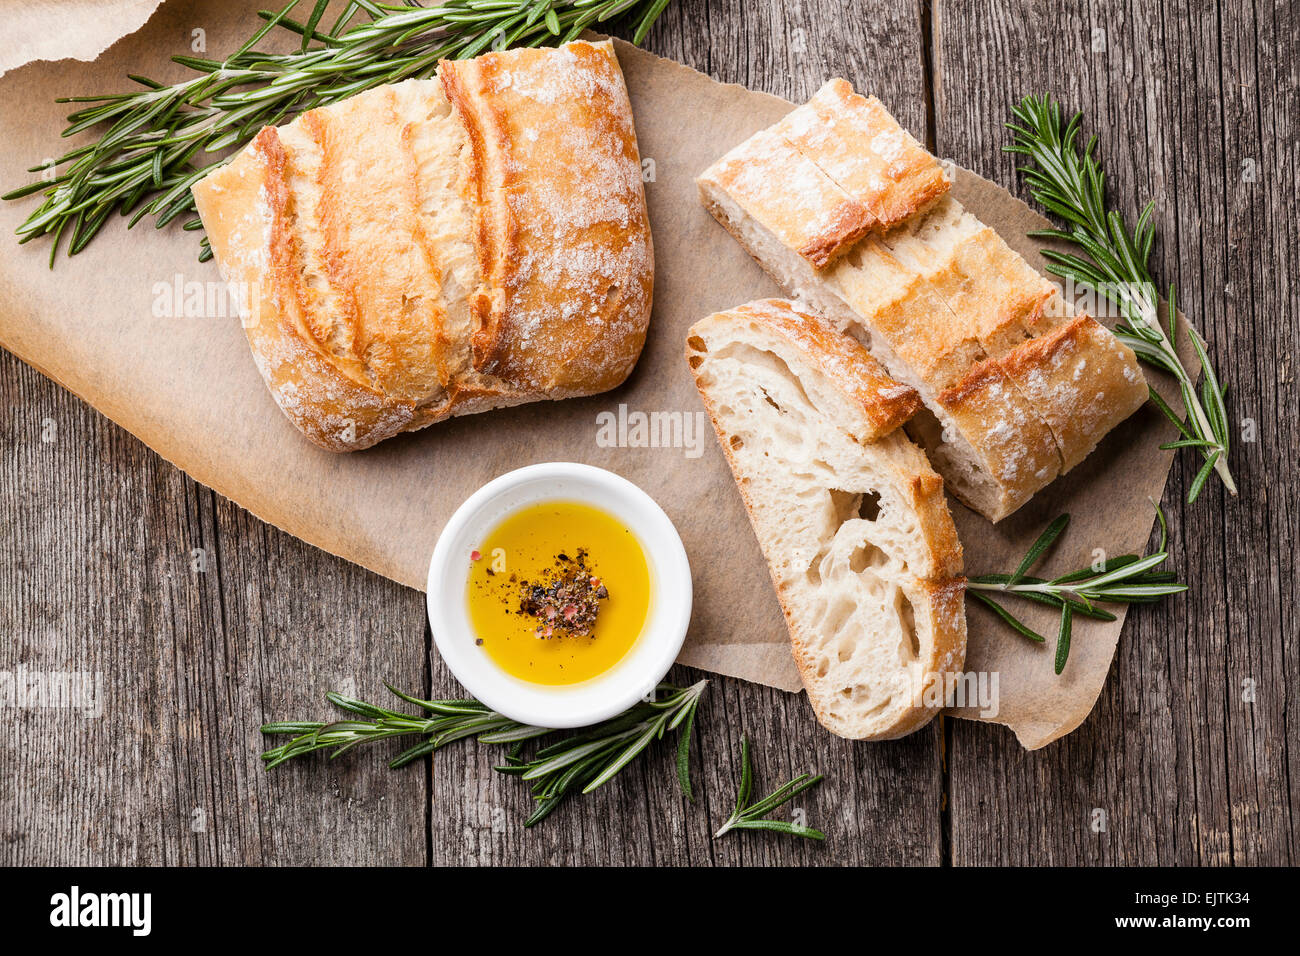 Sliced bread Ciabatta and extra virgin Olive oil on wooden background Stock Photo